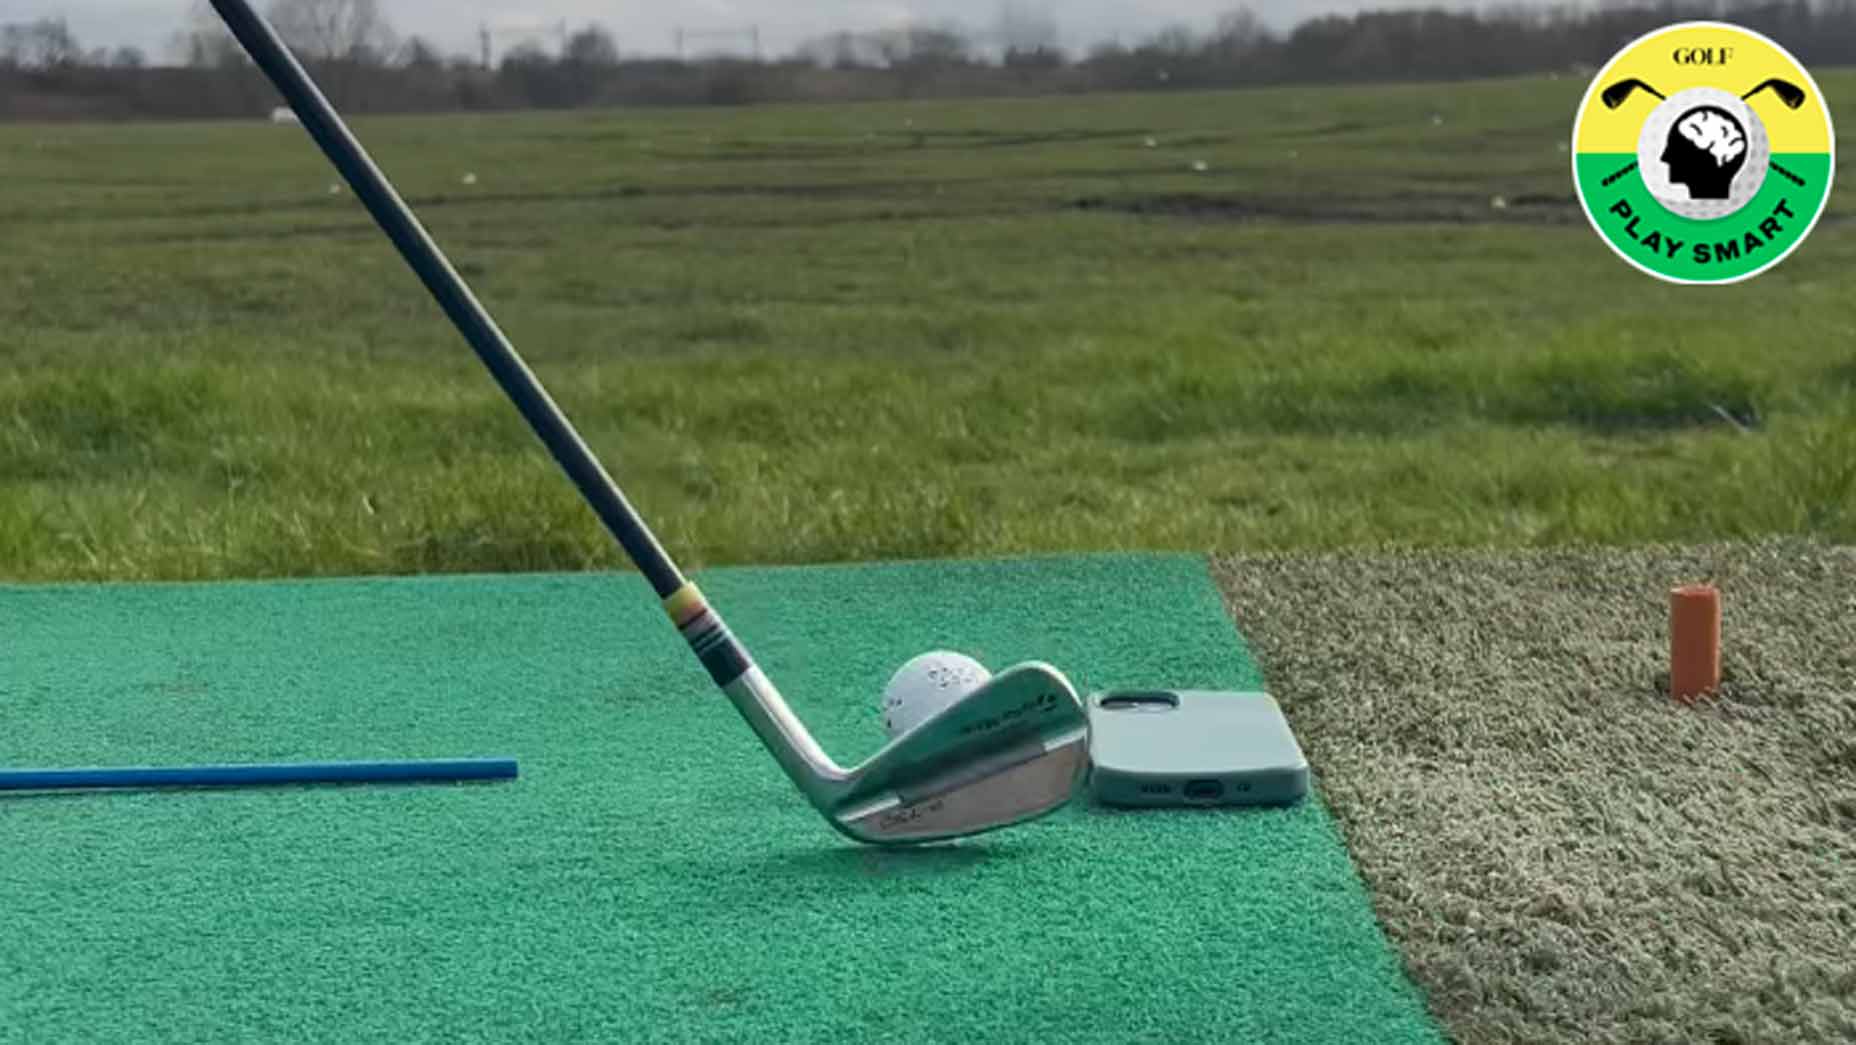 golf club lined up behind golf club with phone on ground next to it